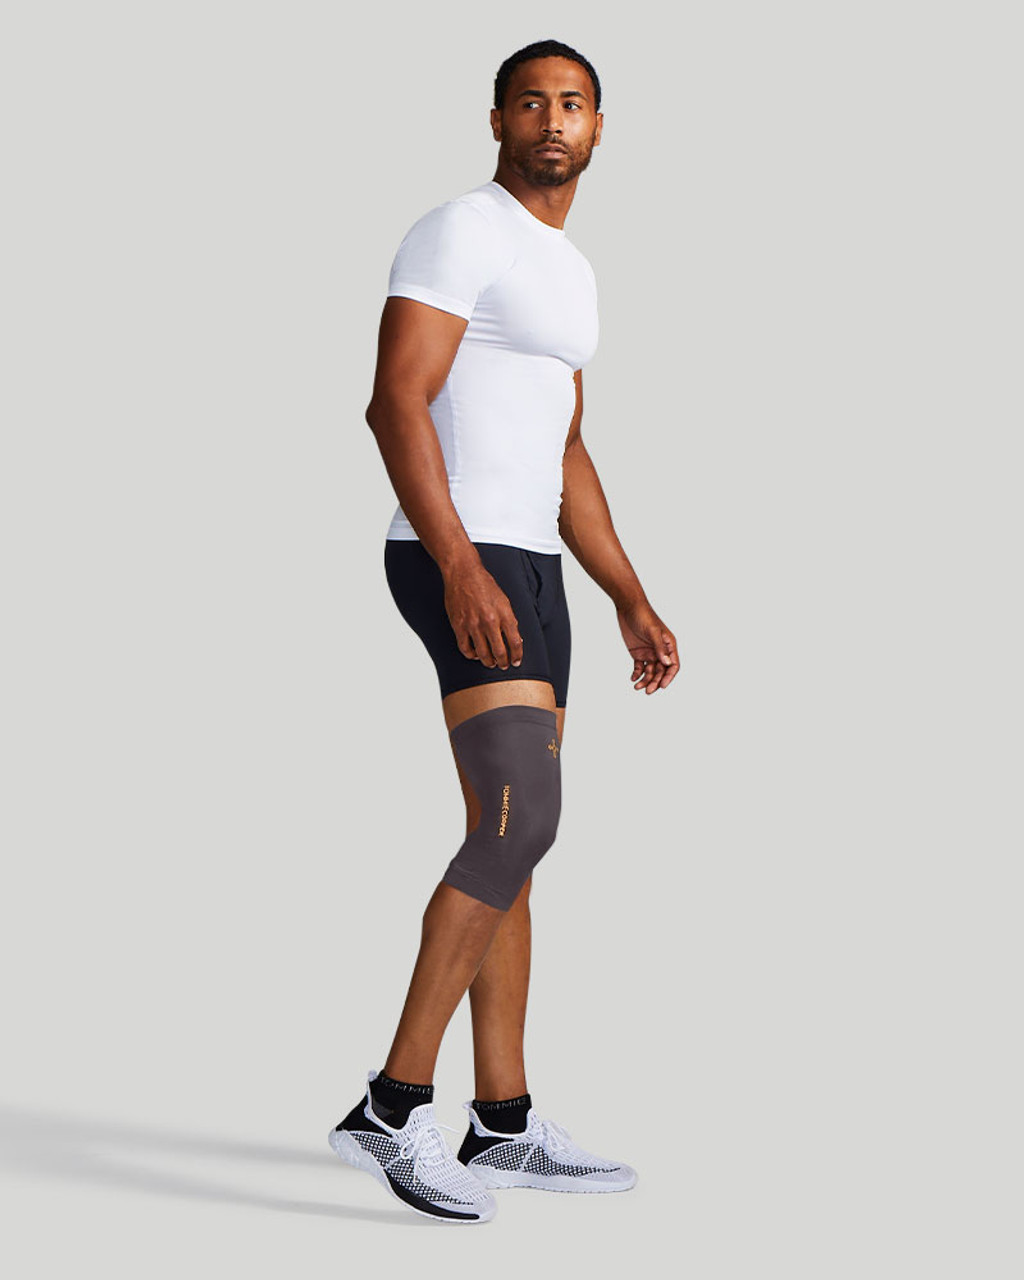 Copper Compression Sleeves & Braces - Help Support Sore Muscles